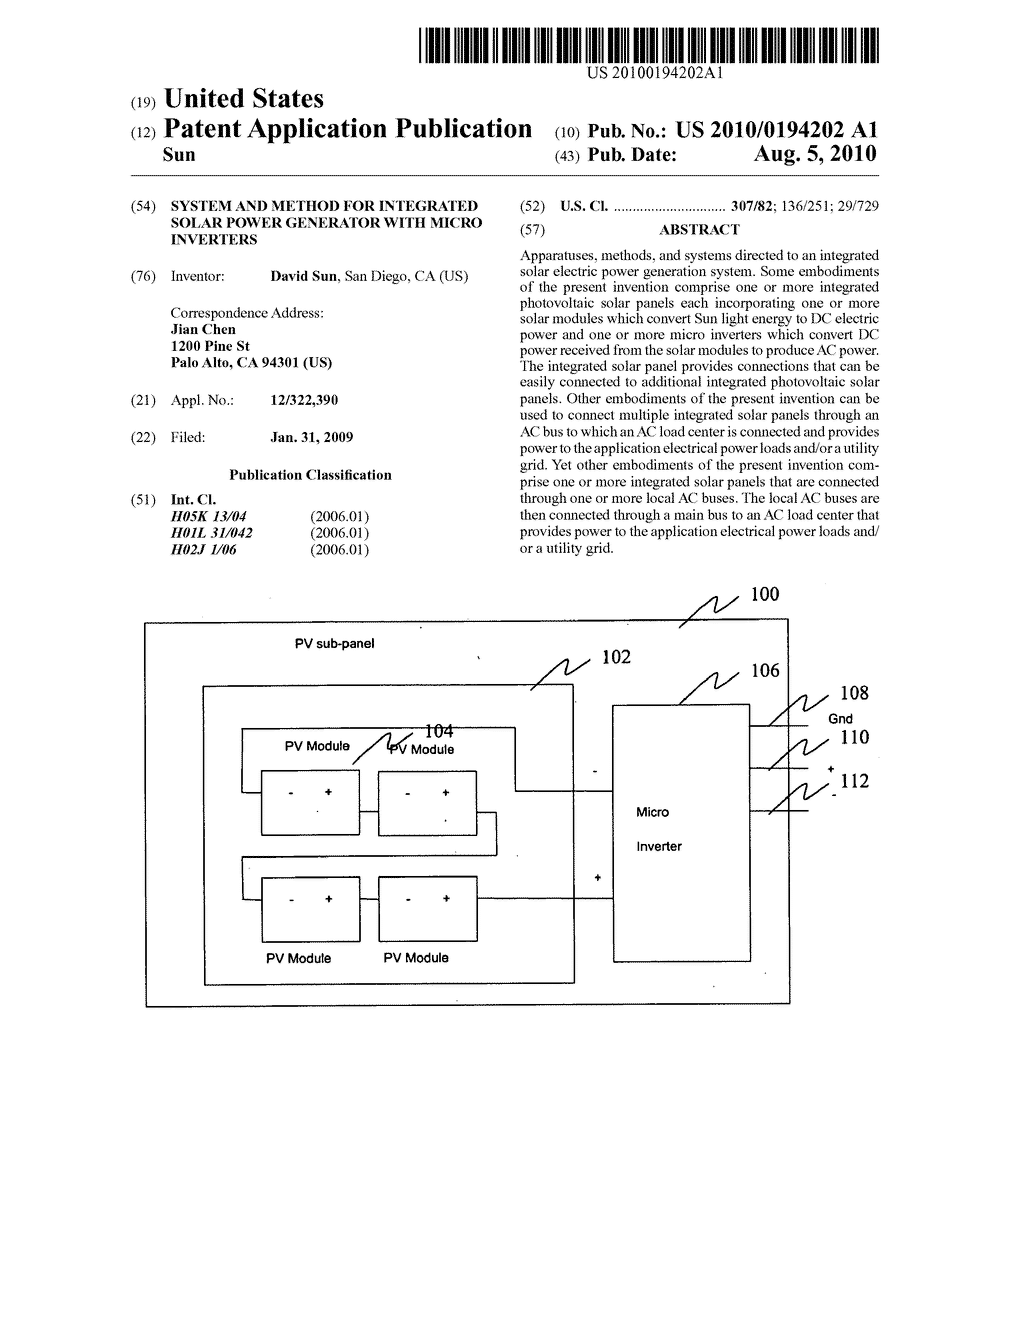 System and method for integrated solar power generator with micro inverters - diagram, schematic, and image 01